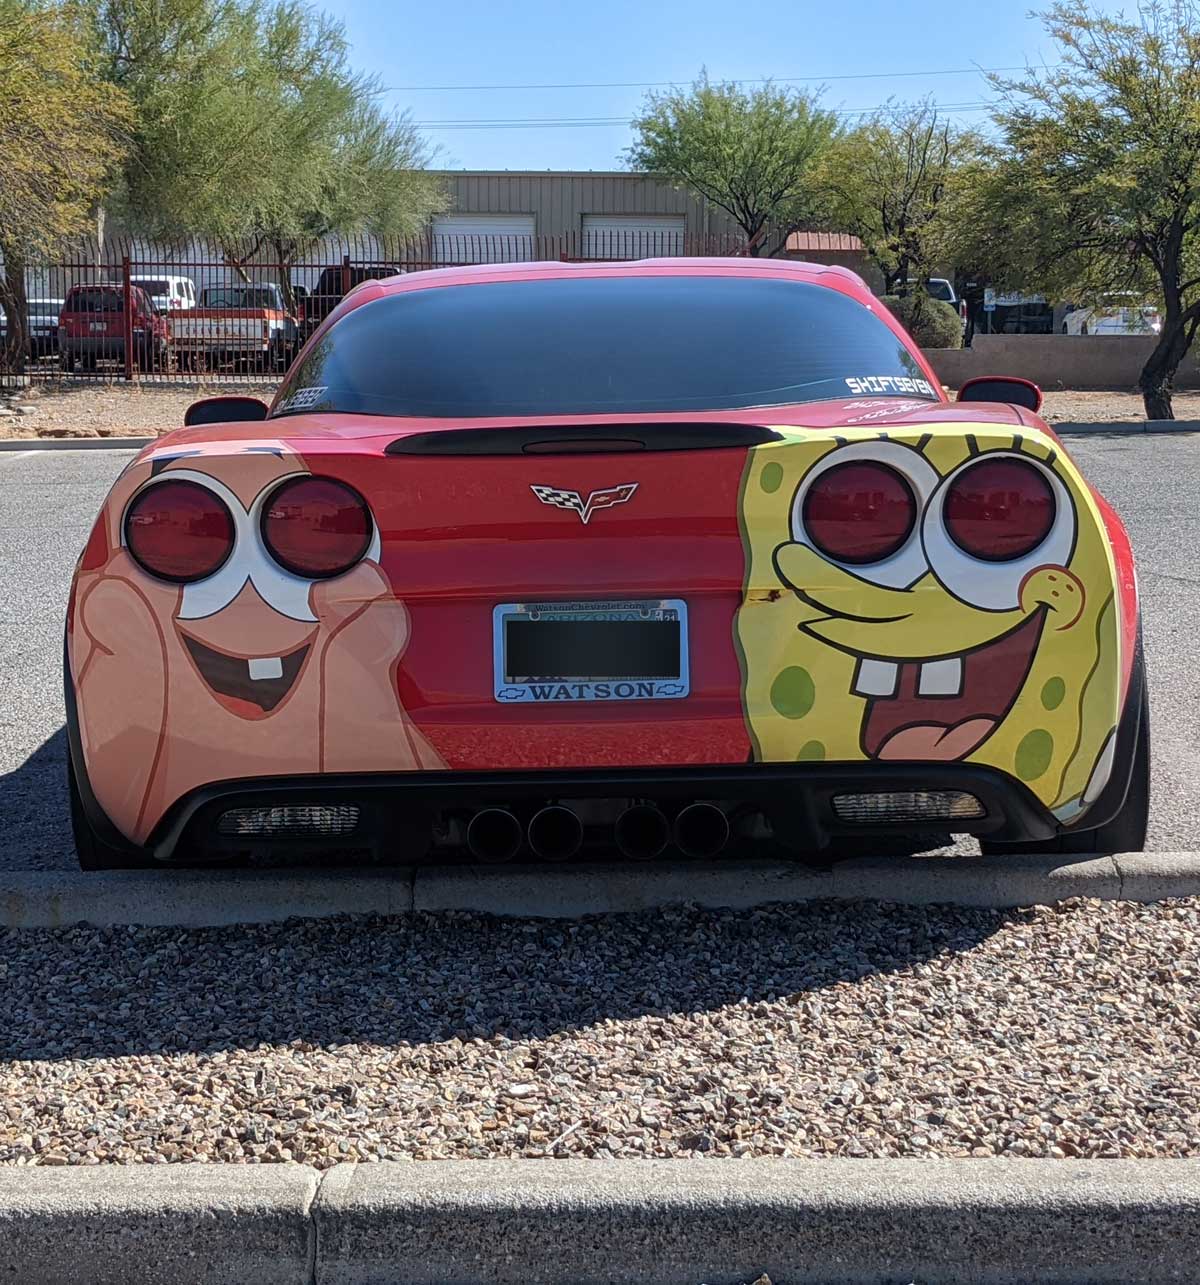 Spotted SpongeBob and Patrick after getting my emissions test done